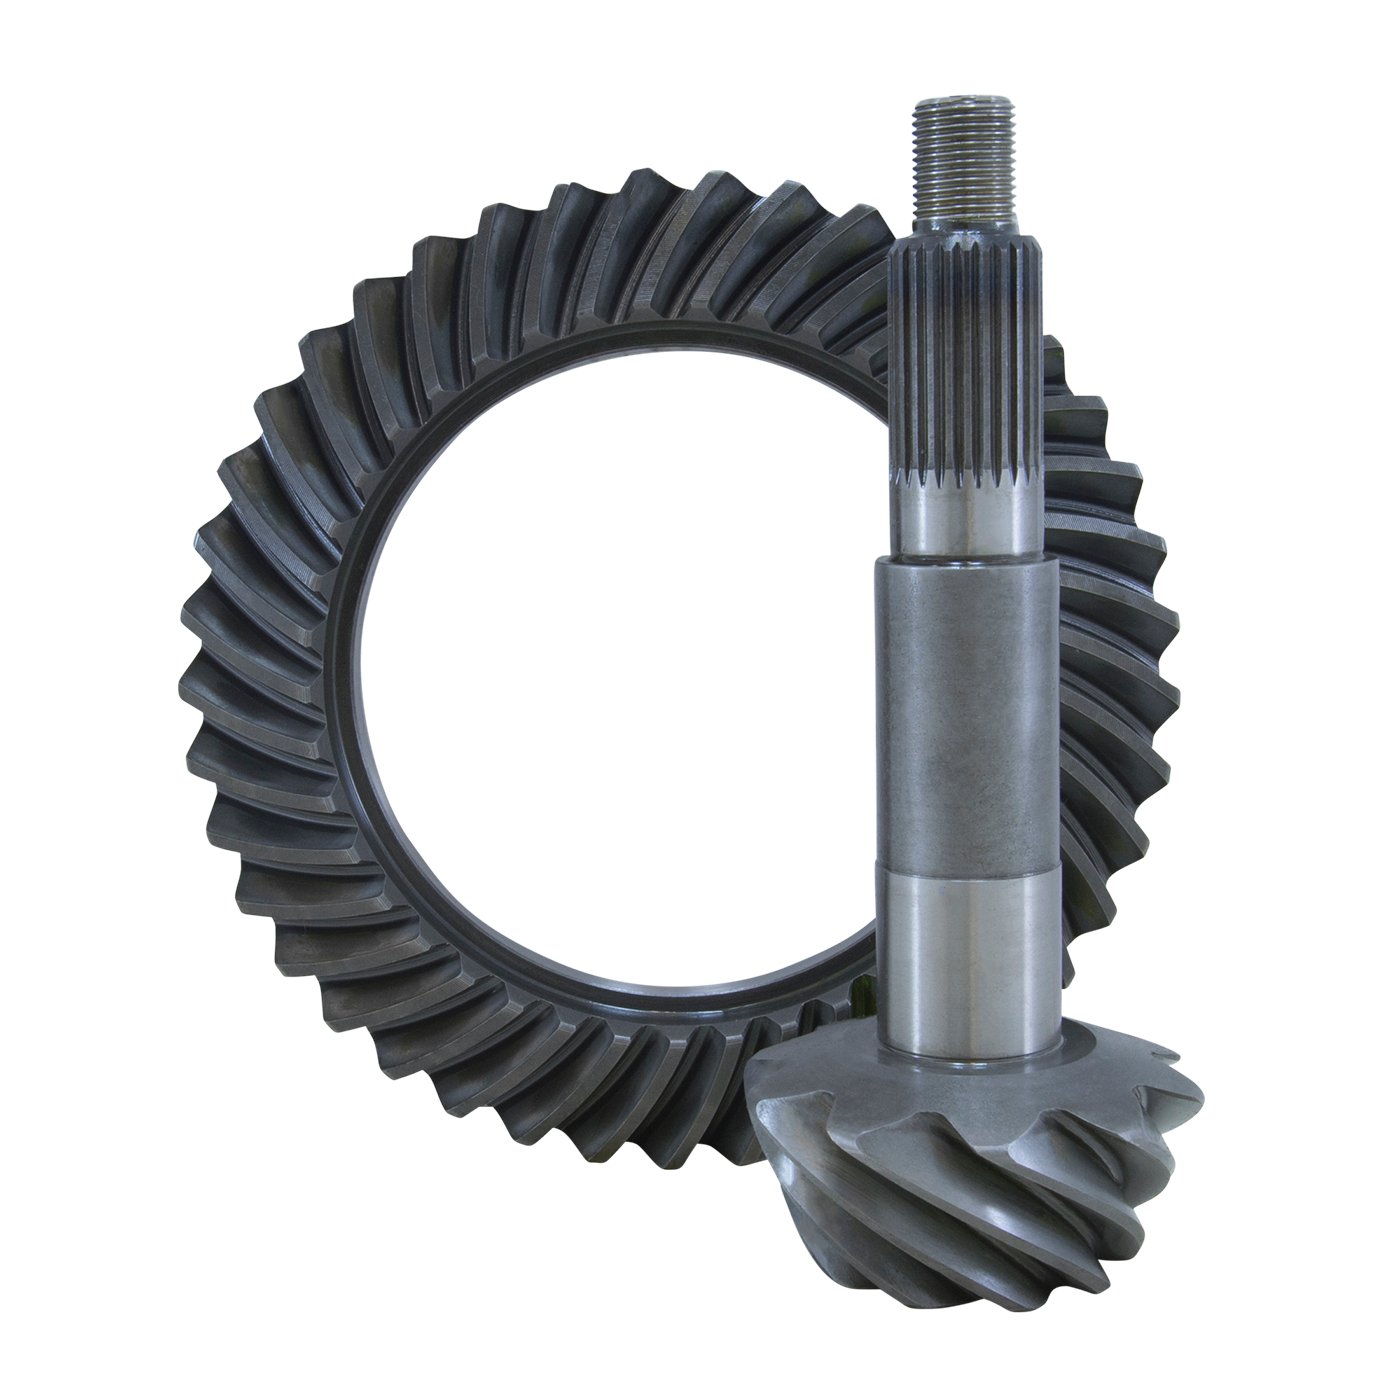 USA Standard ZG D44-456 Replacement Ring & Pinion Gear Set, For Dana 44, 4.56 Ratio